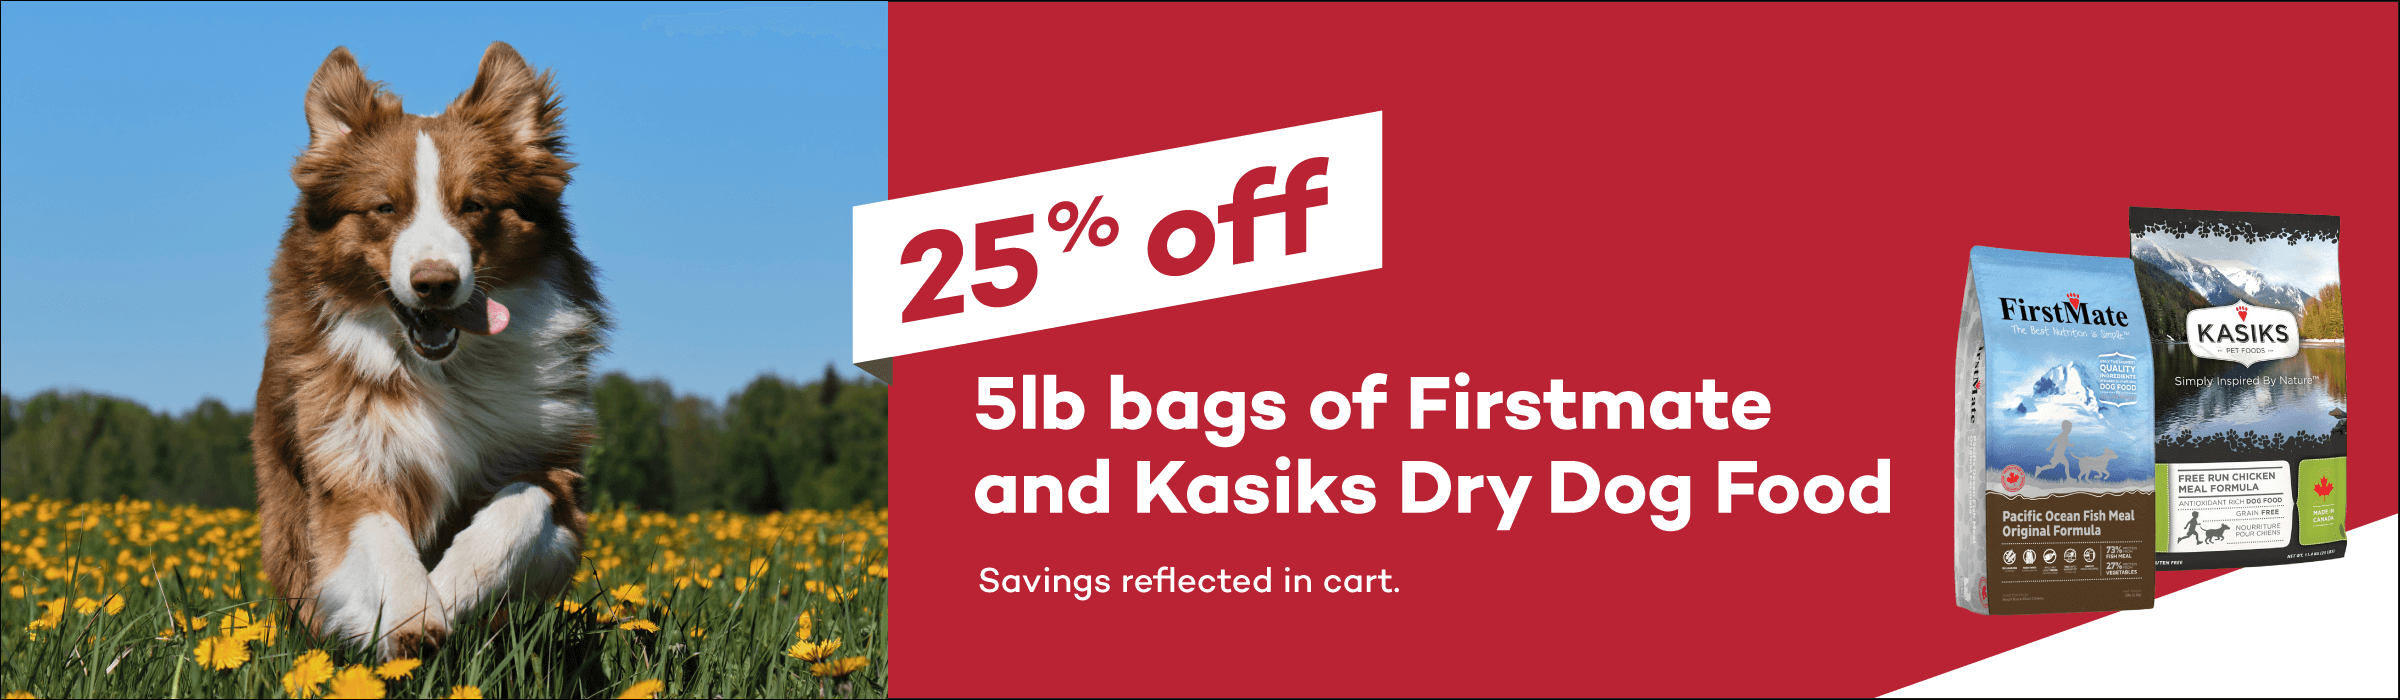 25% off 5lb bags of Firstmate and Kasiks Dry Dog Food. Savings reflected in cart.